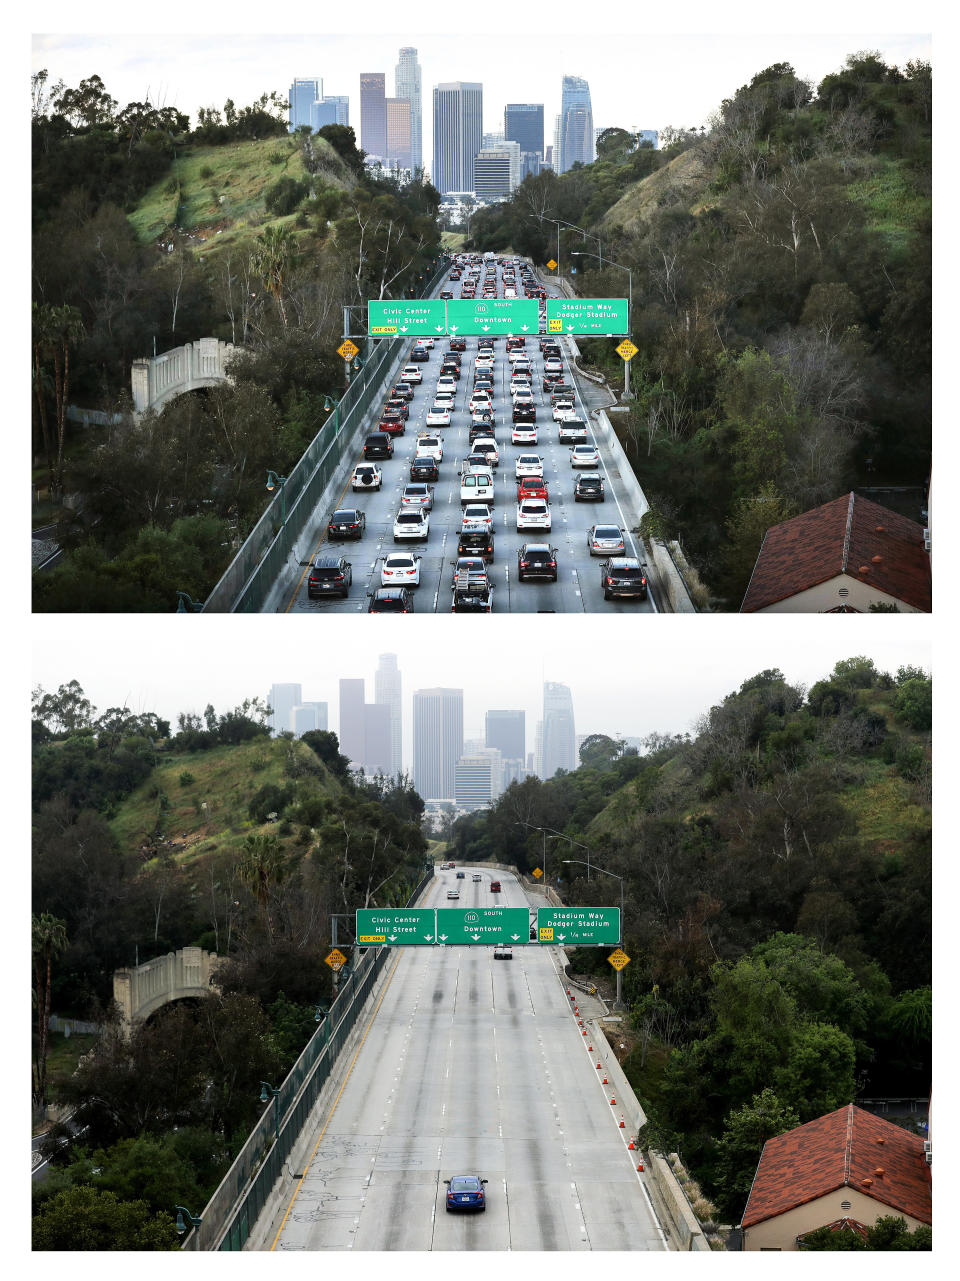 Cars heading downtown during rush hour on the 110 freeway in Los Angeles before stay-at-home orders were issued on March 12, 2020. The bottom image was taken on April 17, at the same time of day. (Photo: Mario Tama via Getty Images)